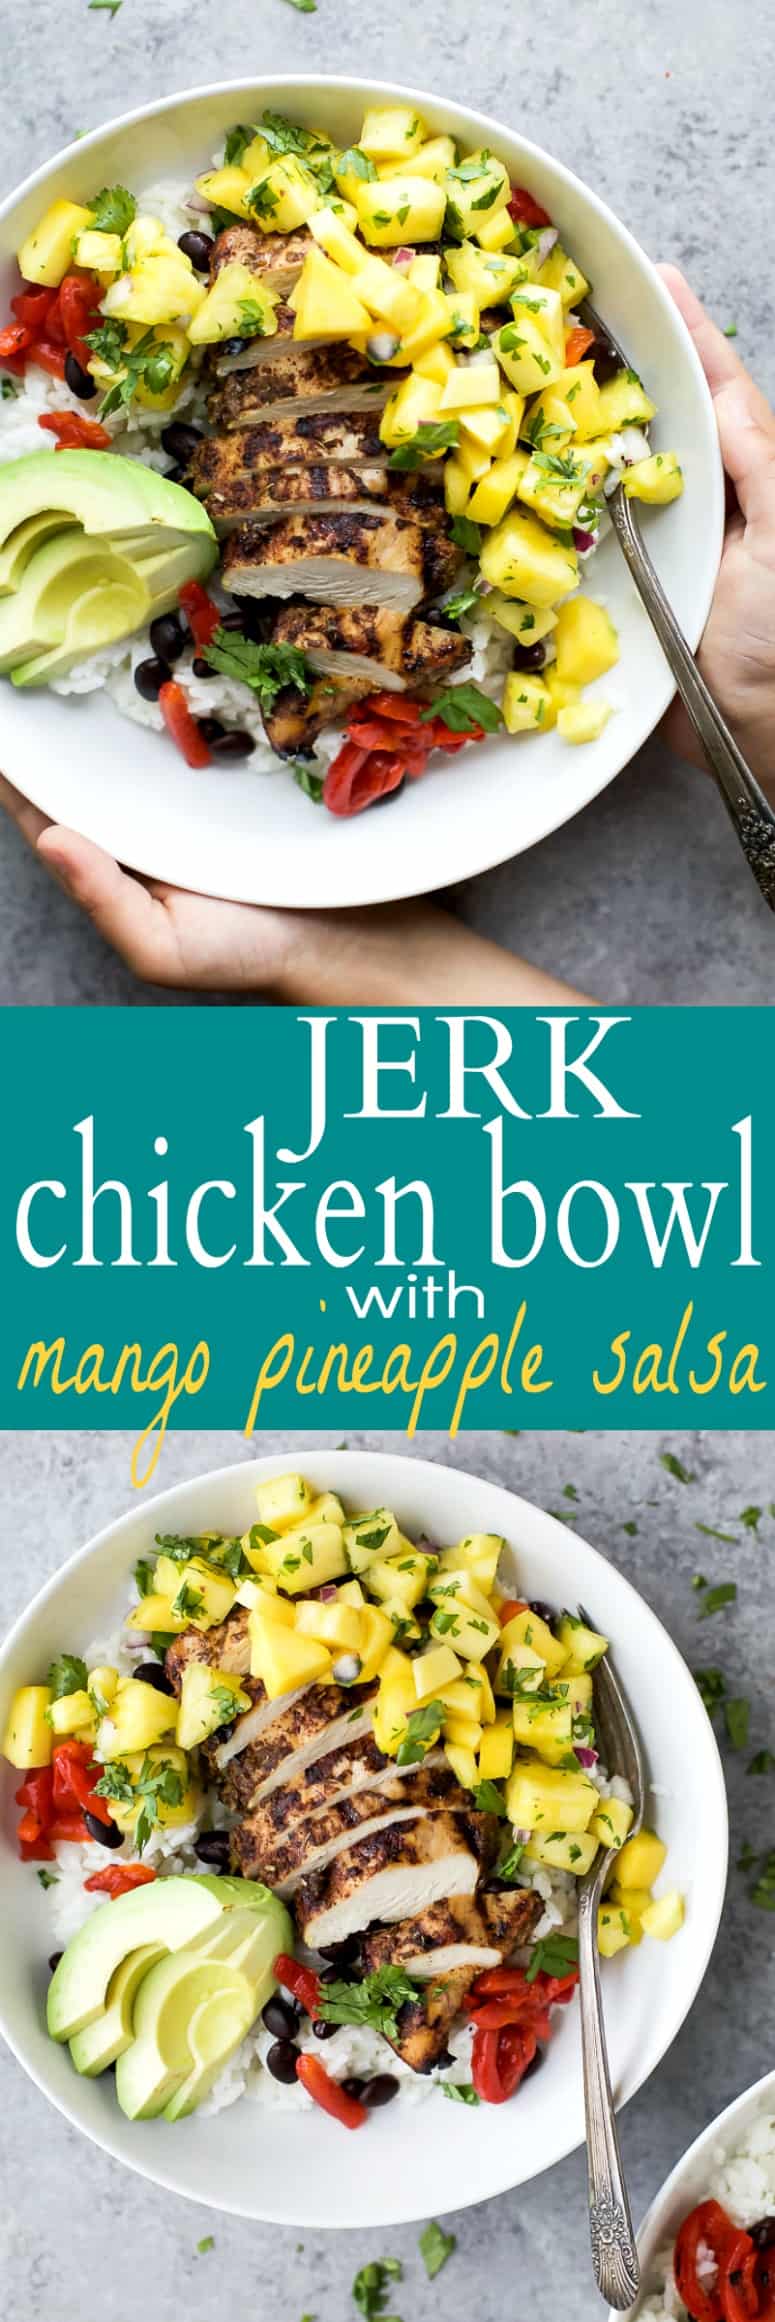 Title Image for Jerk Chicken Bowls with Mango Pineapple Salsa